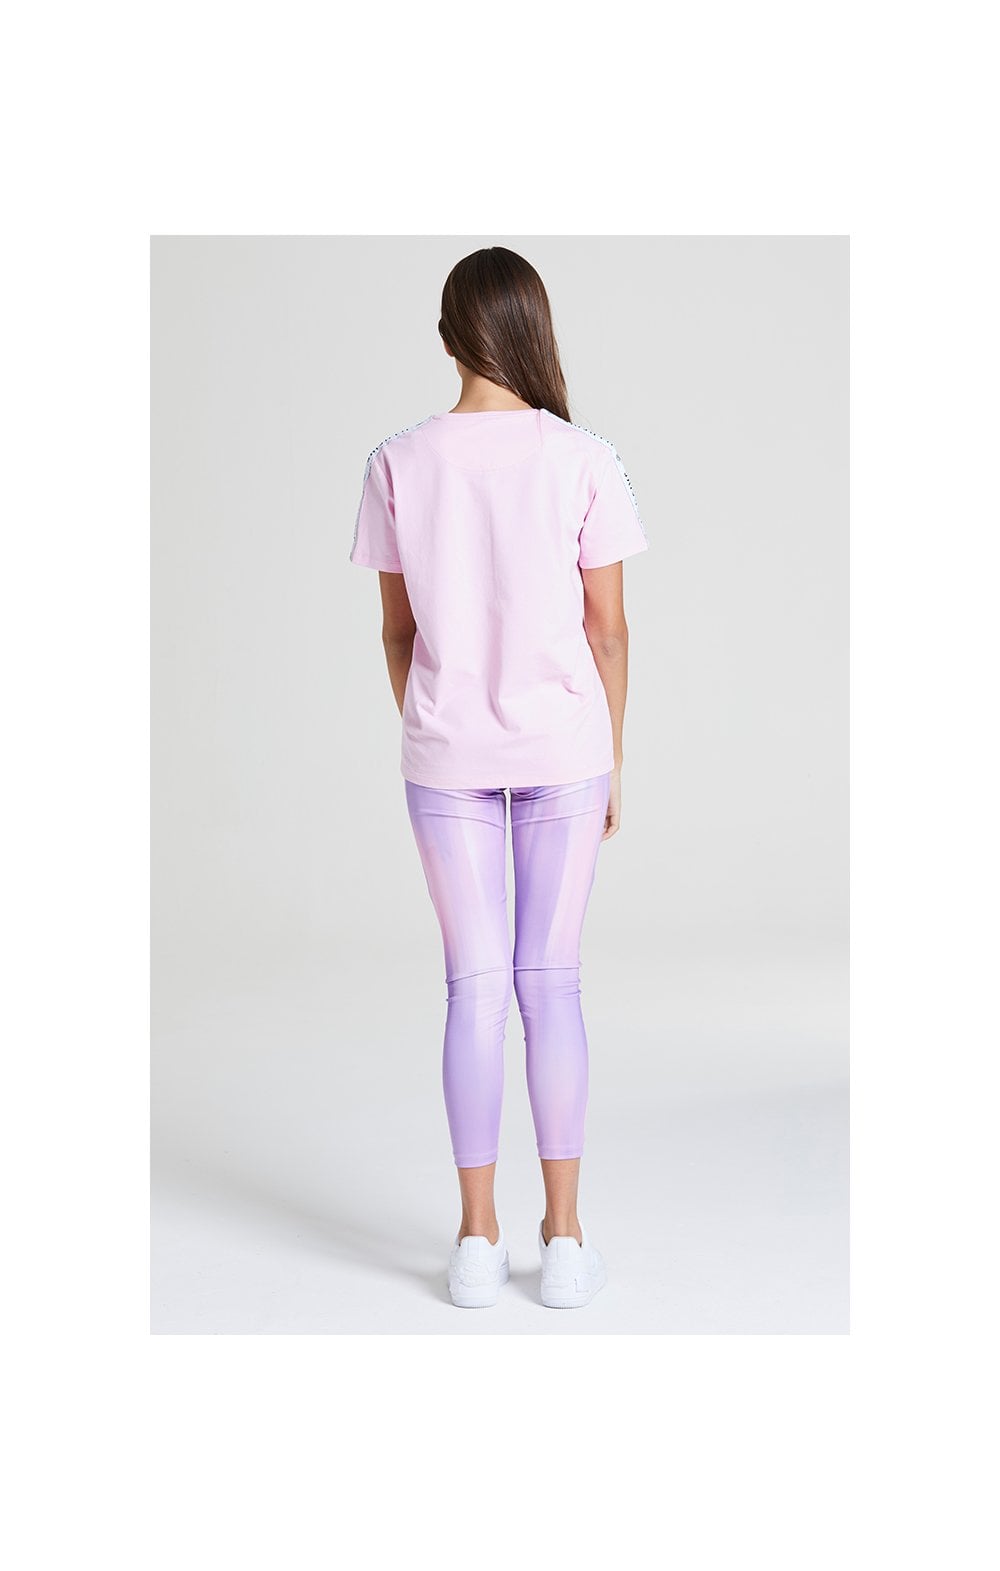 Illusive London BF Fit Taped Tee - Pink (4)